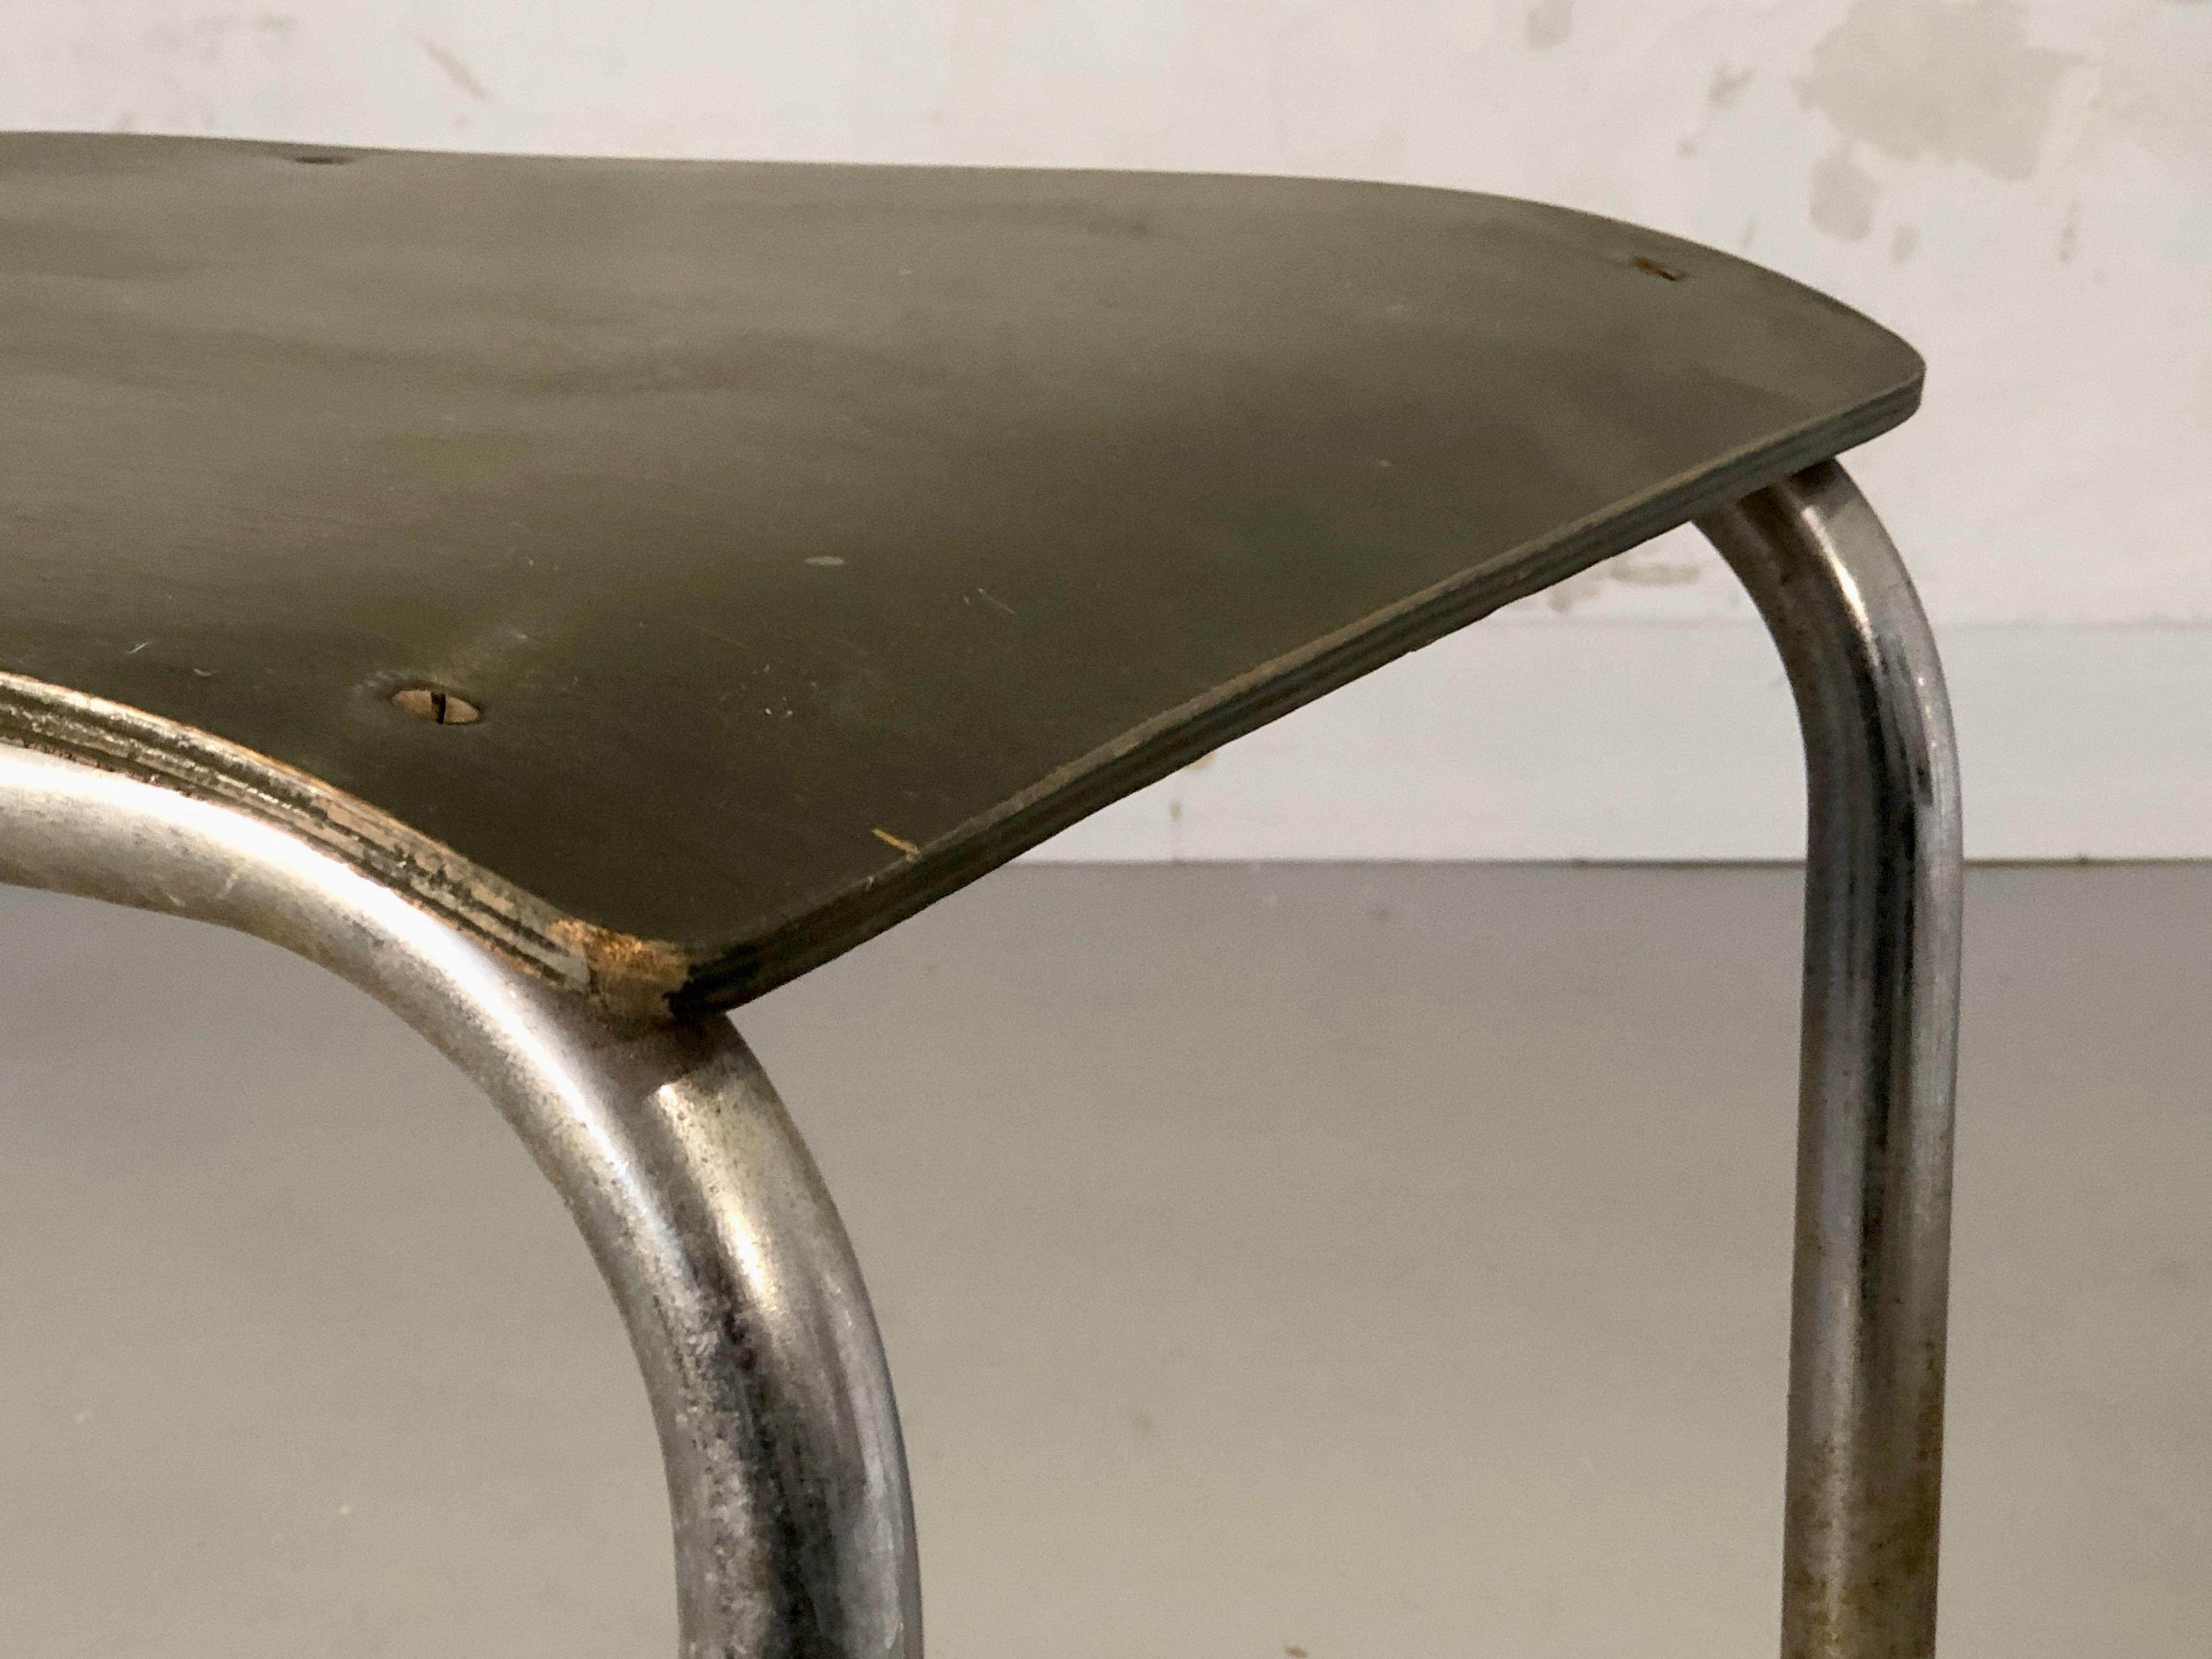 An Early MODERNIST BAUHAUS CHAIR by MART STAM for MAUSER WERKE, Germany 1930 For Sale 10